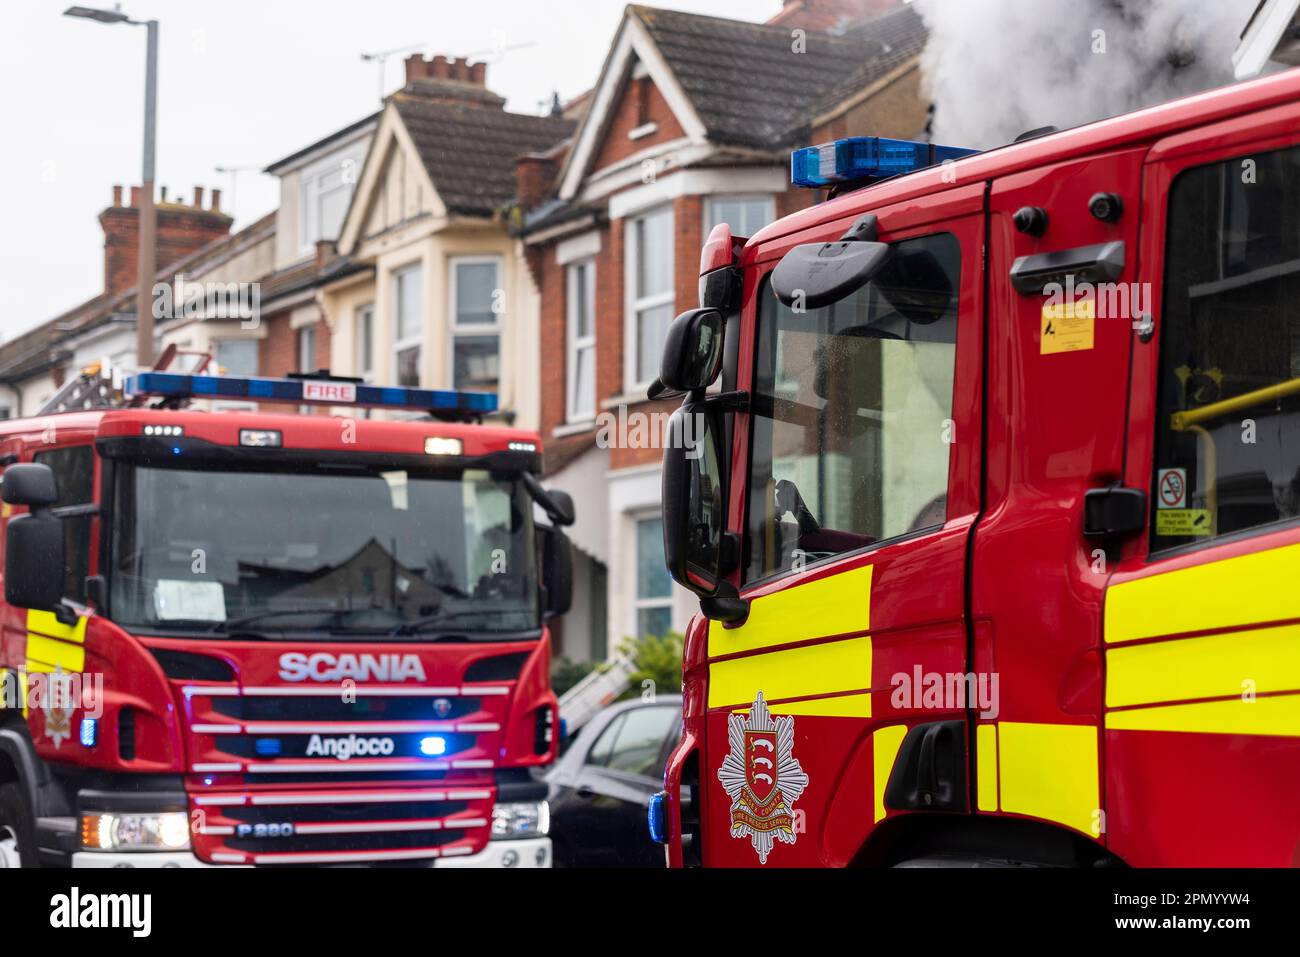 Essex County Fire & Rescue Service responding to a house fire in Westcliff on Sea, Essex, UK. Fire engines on scene, with smoke from property Stock Photo